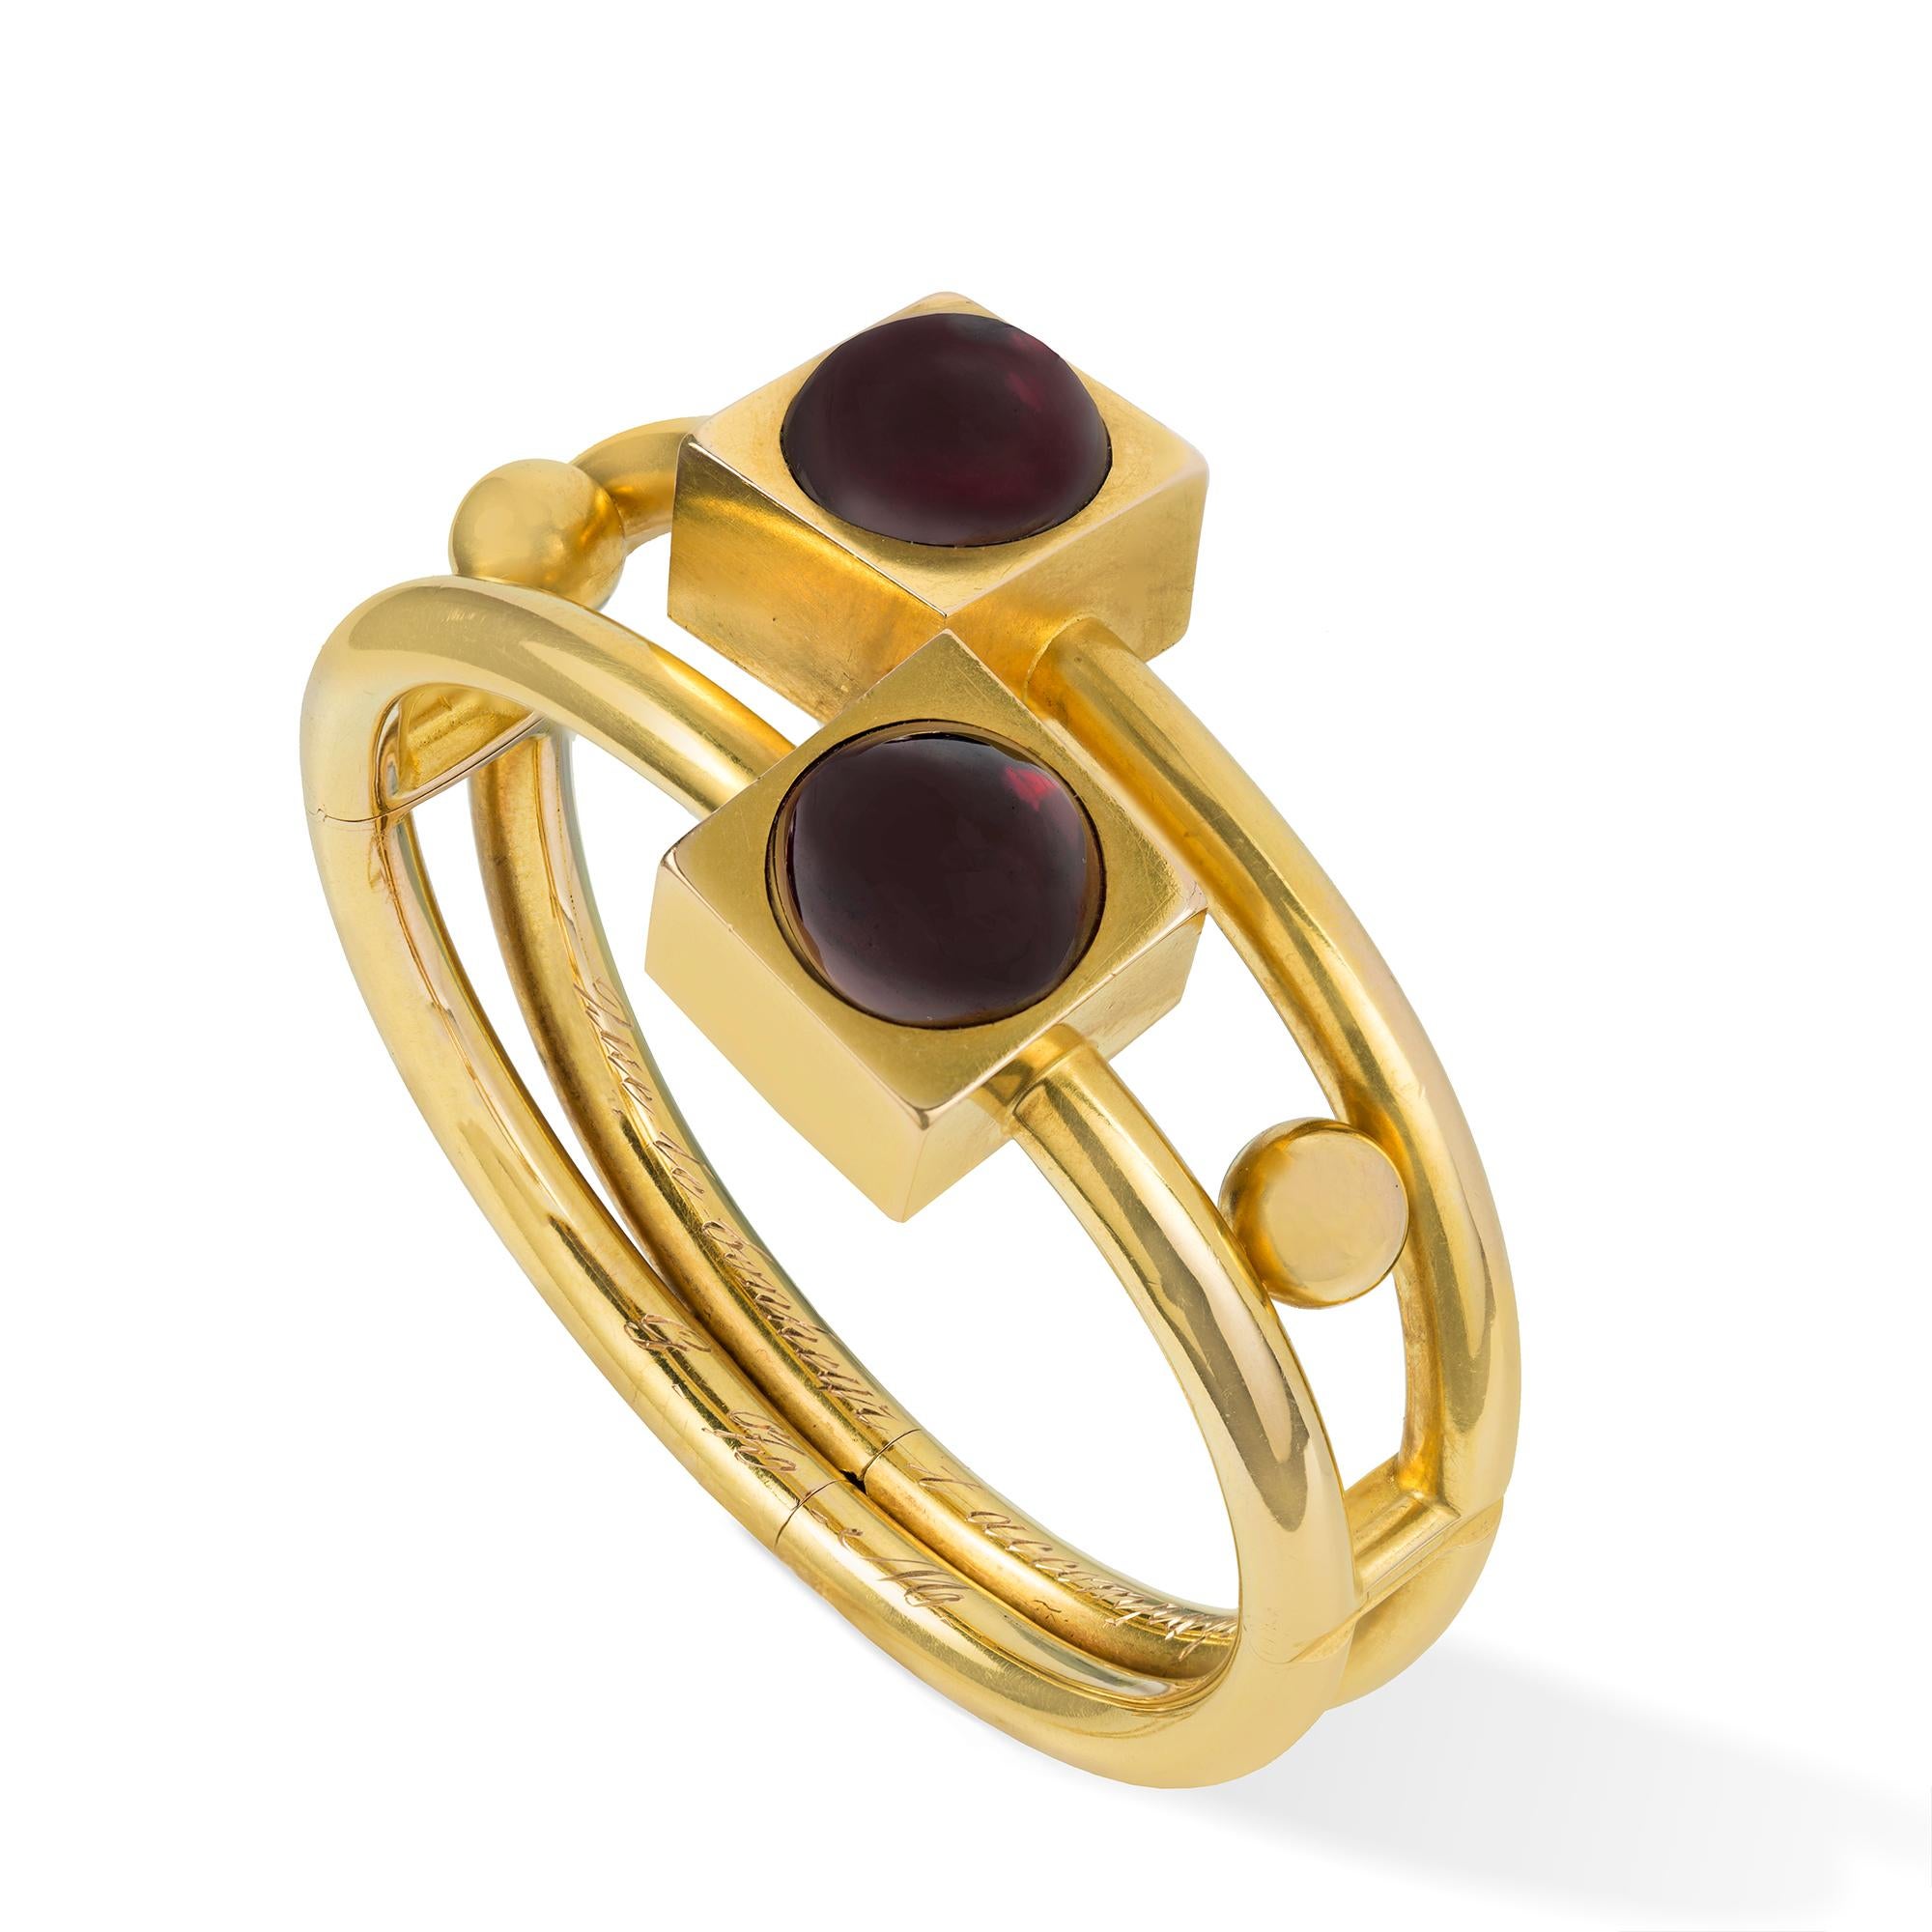 A late nineteenth-century gold and garnet bangle, the geometrical designed bangle centrally with the two gold cubes each set with a round carbuncle garnet, to a split yellow gold hinged bangle with concealed hinged clasp and safety chain, all in